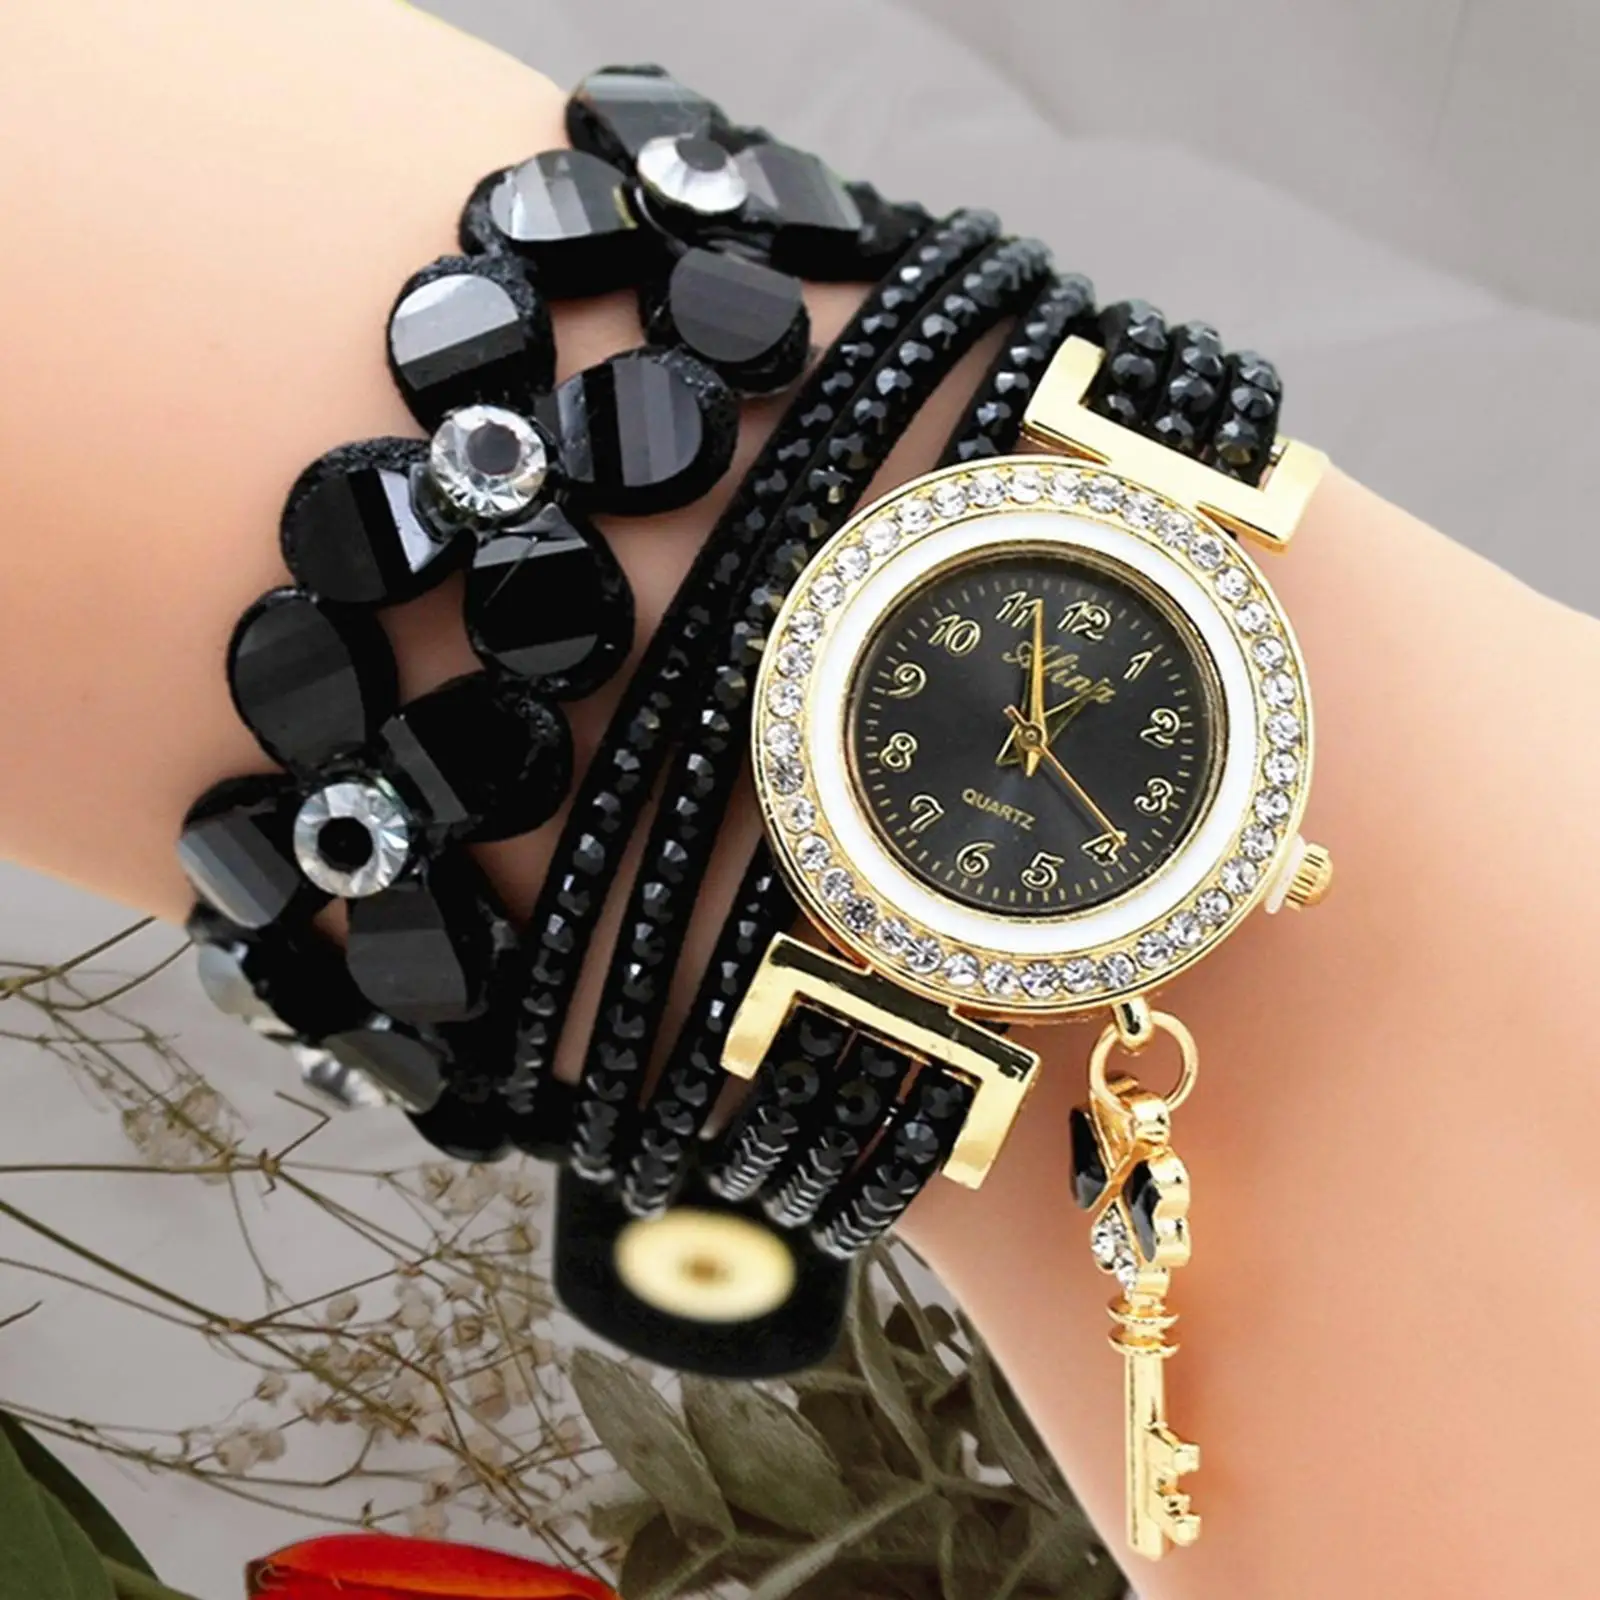 Bracelet Watch Decorative Lightweight Women Time Display Pointer Wristwatch for Camping Shopping Travel Outdoor Activities Party